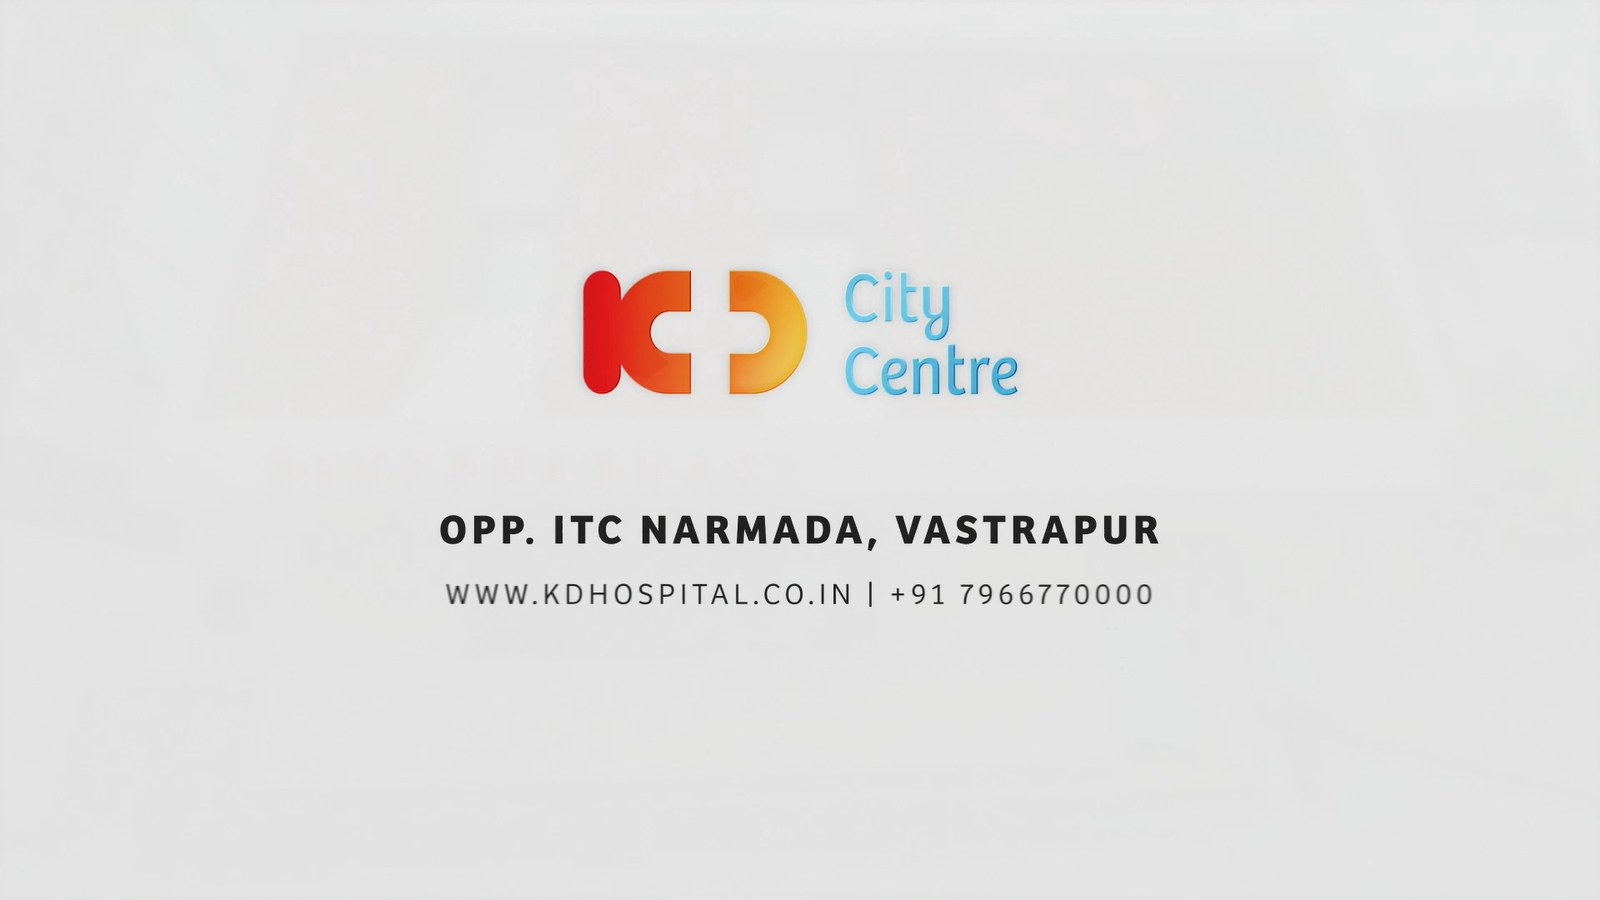 KD Hospital launches KD City Centre, Opp. ITC Narmada, Vastrapur.

Get convenient access to multiple healthcare services like Superspeciality OPD, Dialysis, Chemotherapy, Endoscopy, 24x7 Pharmacy, Radiology, and Pathology services near you. 

Get the right guidance from the healthcare experts of Ahmedabad along with modern medical technology. All under one roof!

#KDHospital #KDCityCentre #SuperSpeciality #Vastrapur #Ahmedabad #Hospital #Clinic #OPD